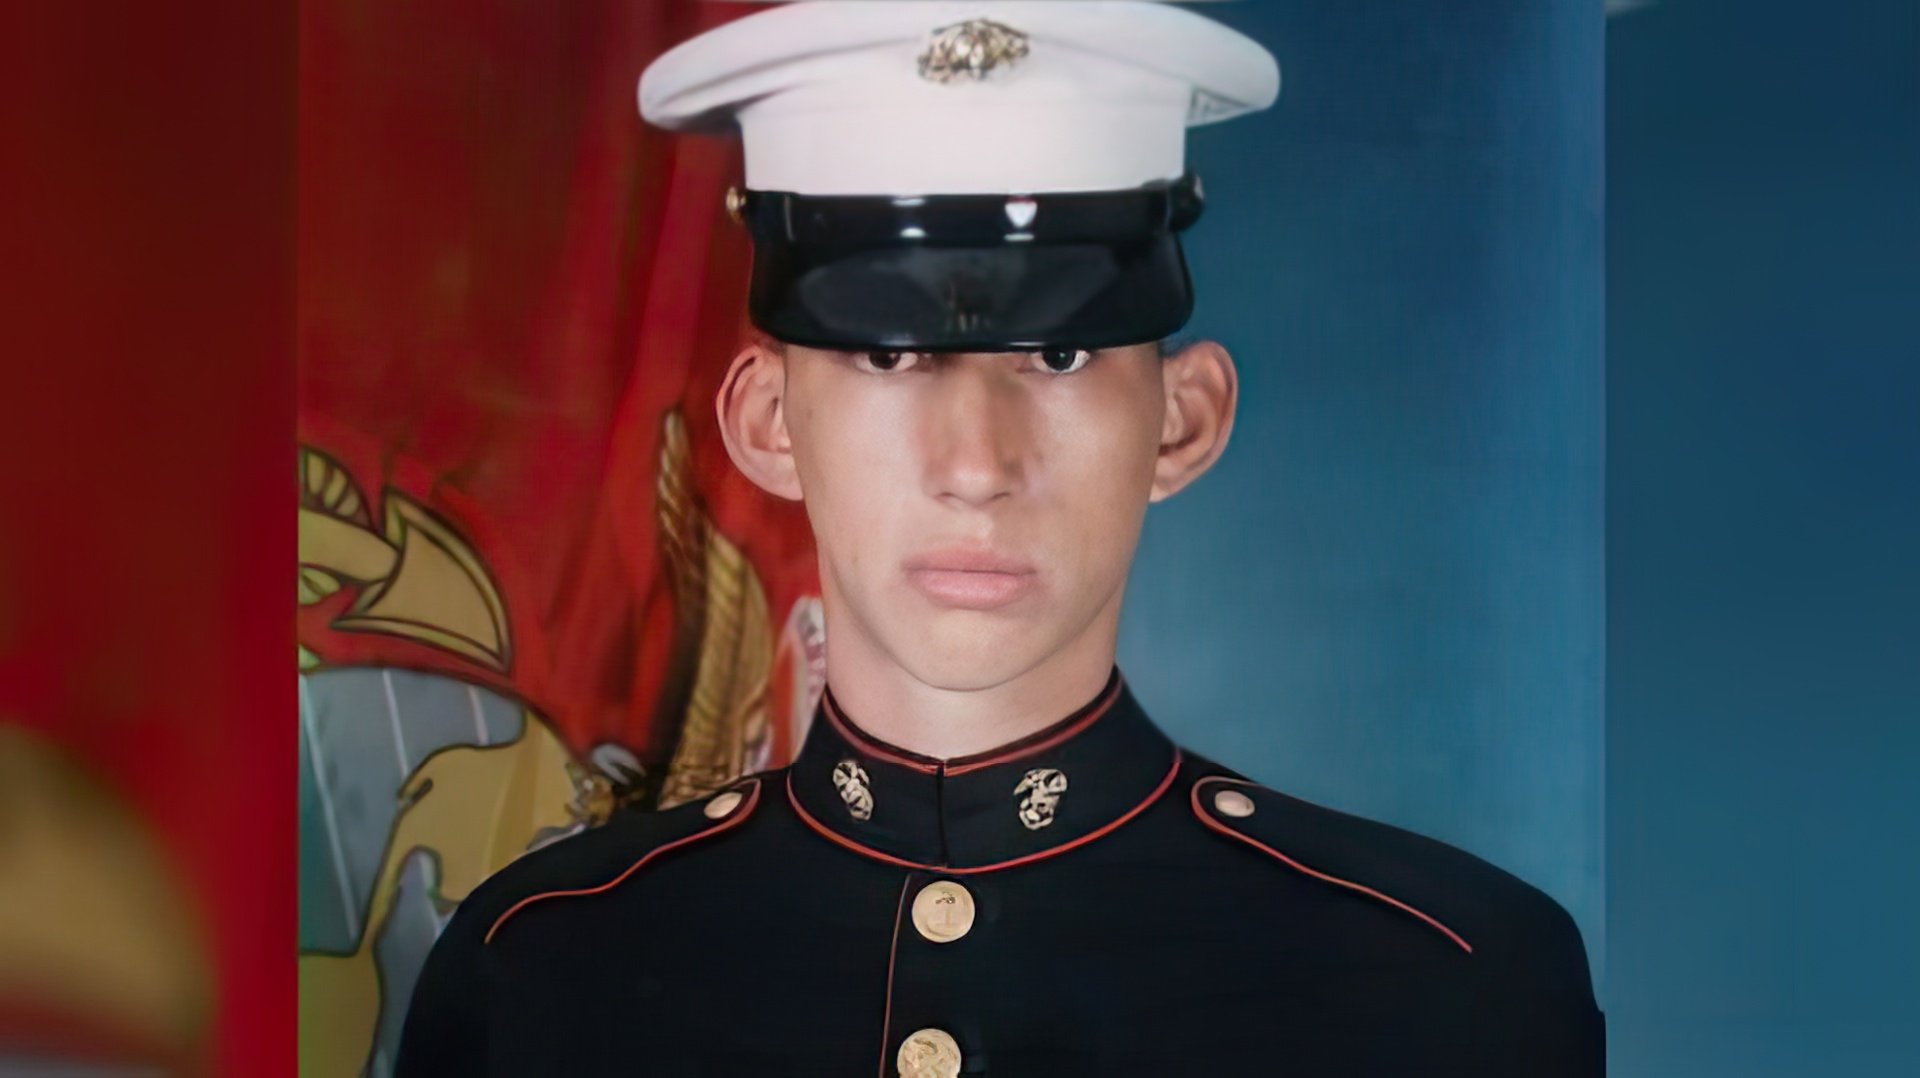 Adam Driver served in the Marine Corps